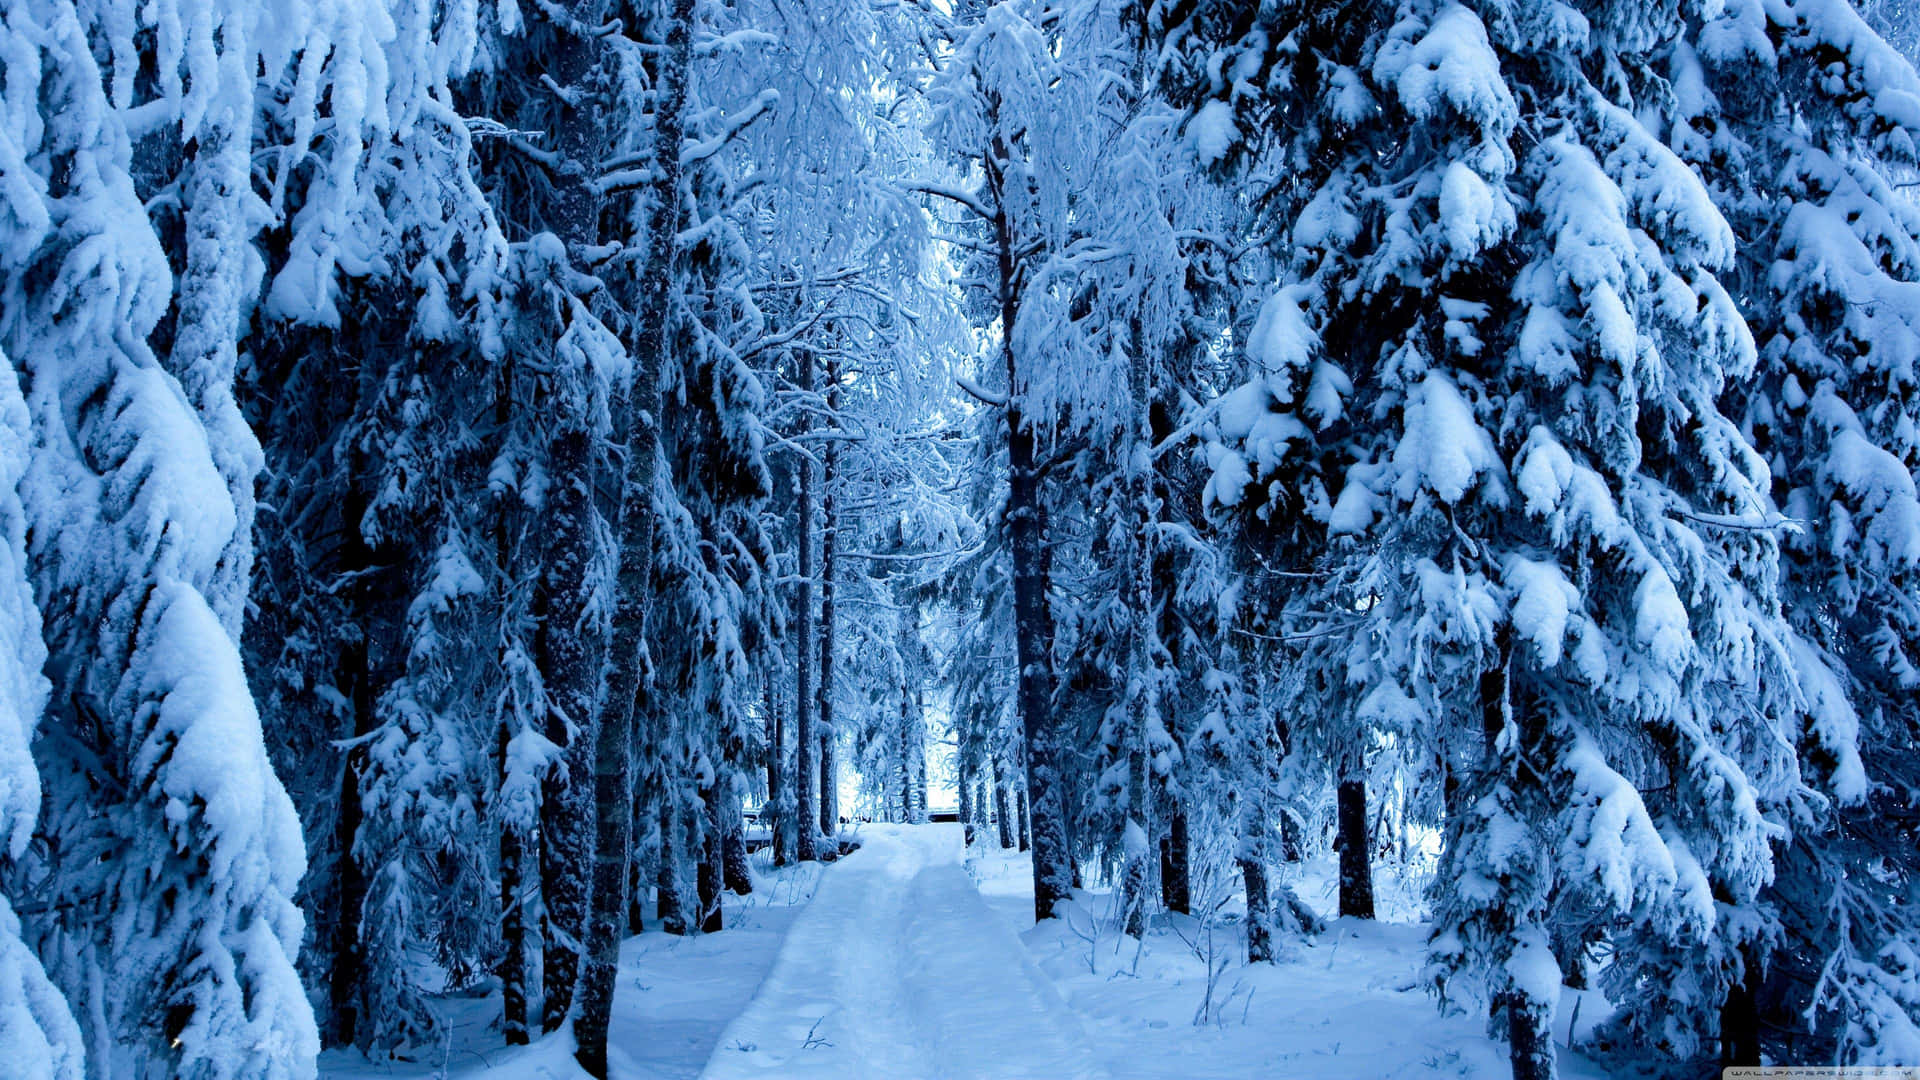 A Snowy Path Through A Forest With Trees